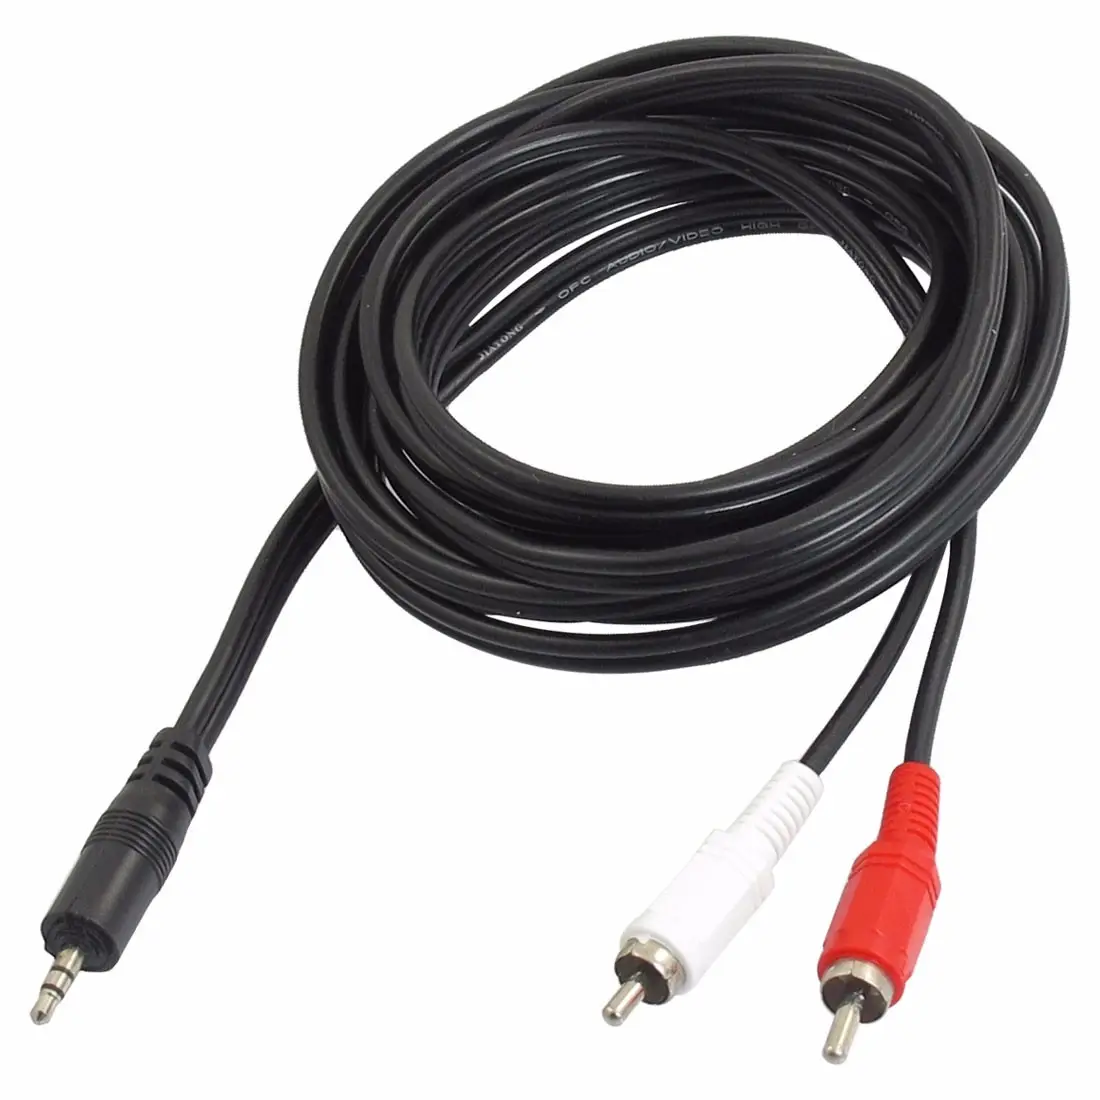 OEM Wholesale customization audio speaker cable TRS jacket instruments guitar link audio cable av Cable